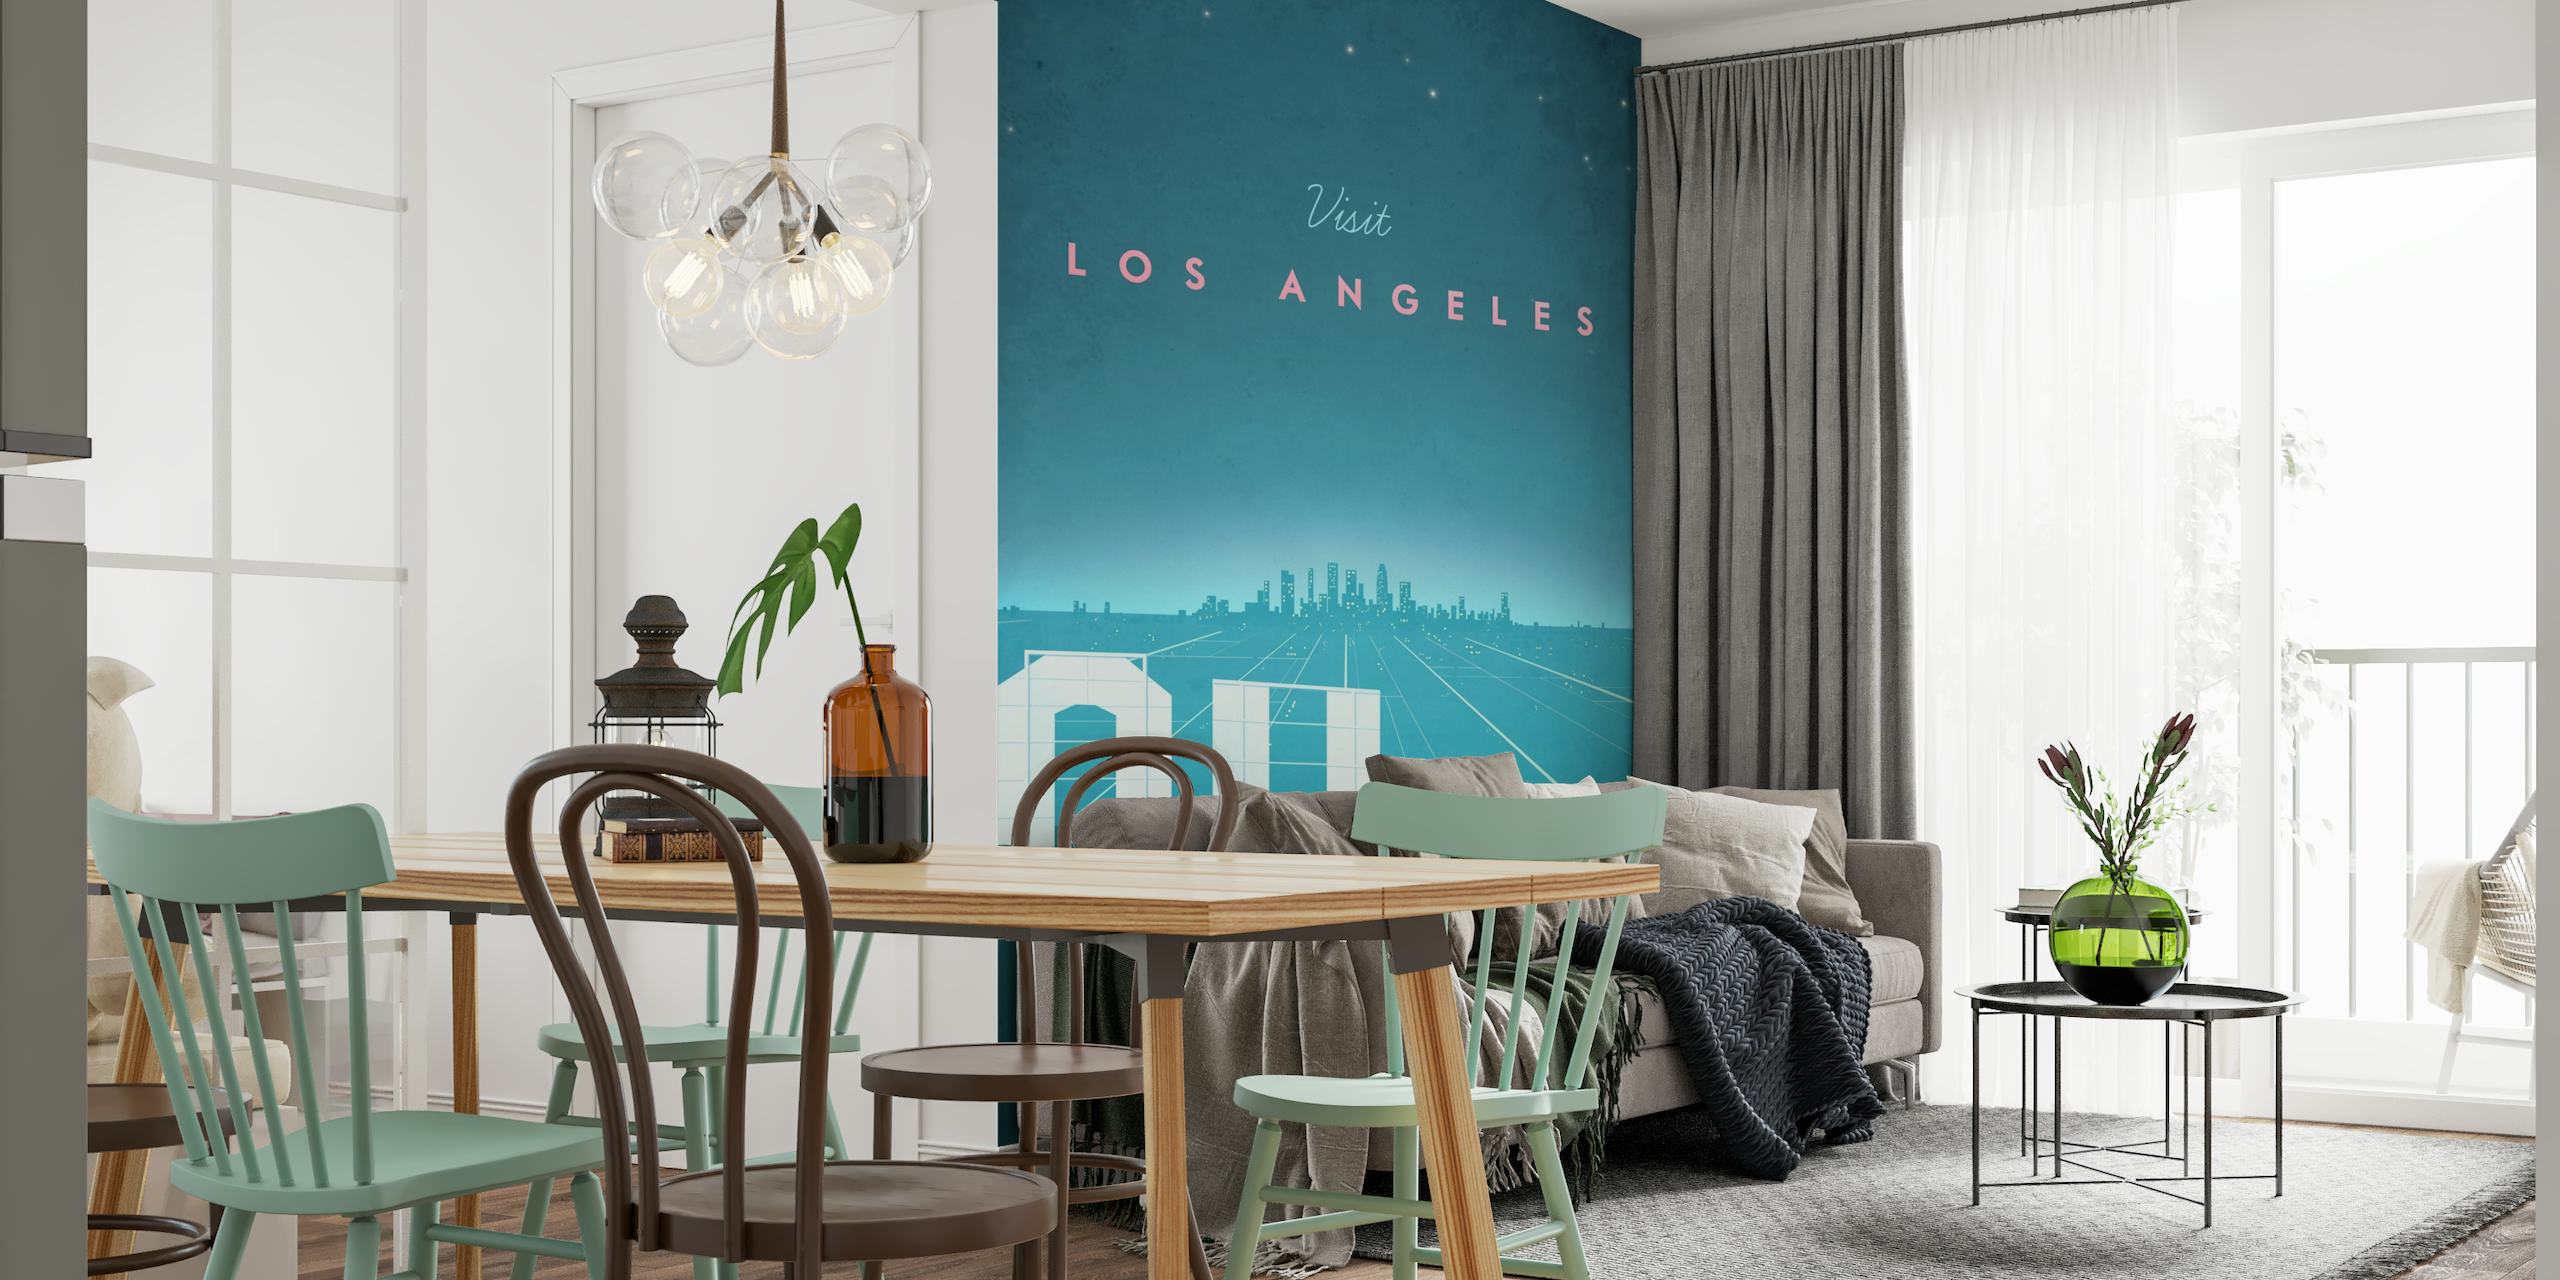 Los Angeles Travel Poster behang